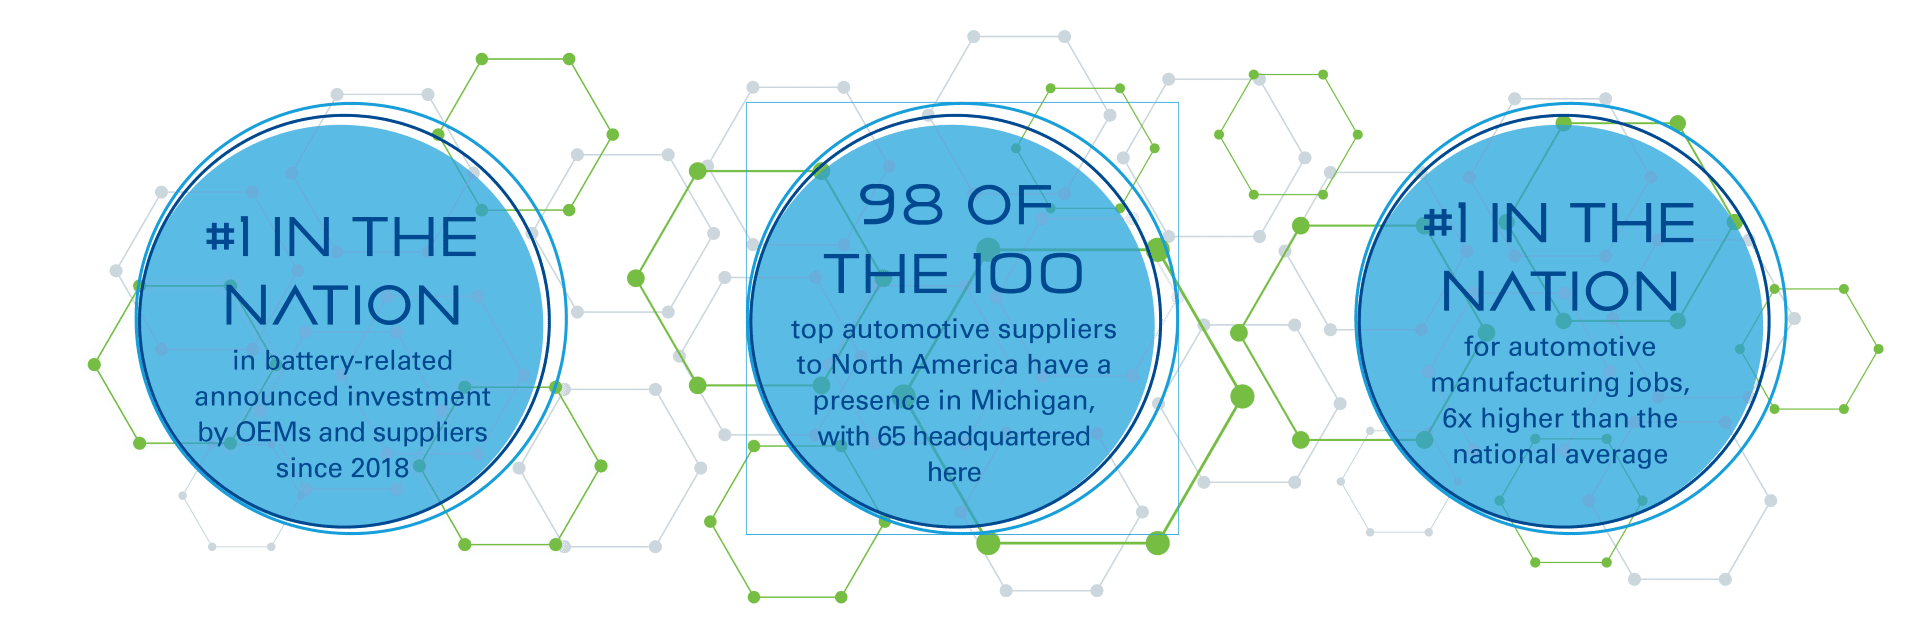 Michigan is Automobility 2023 report graphic